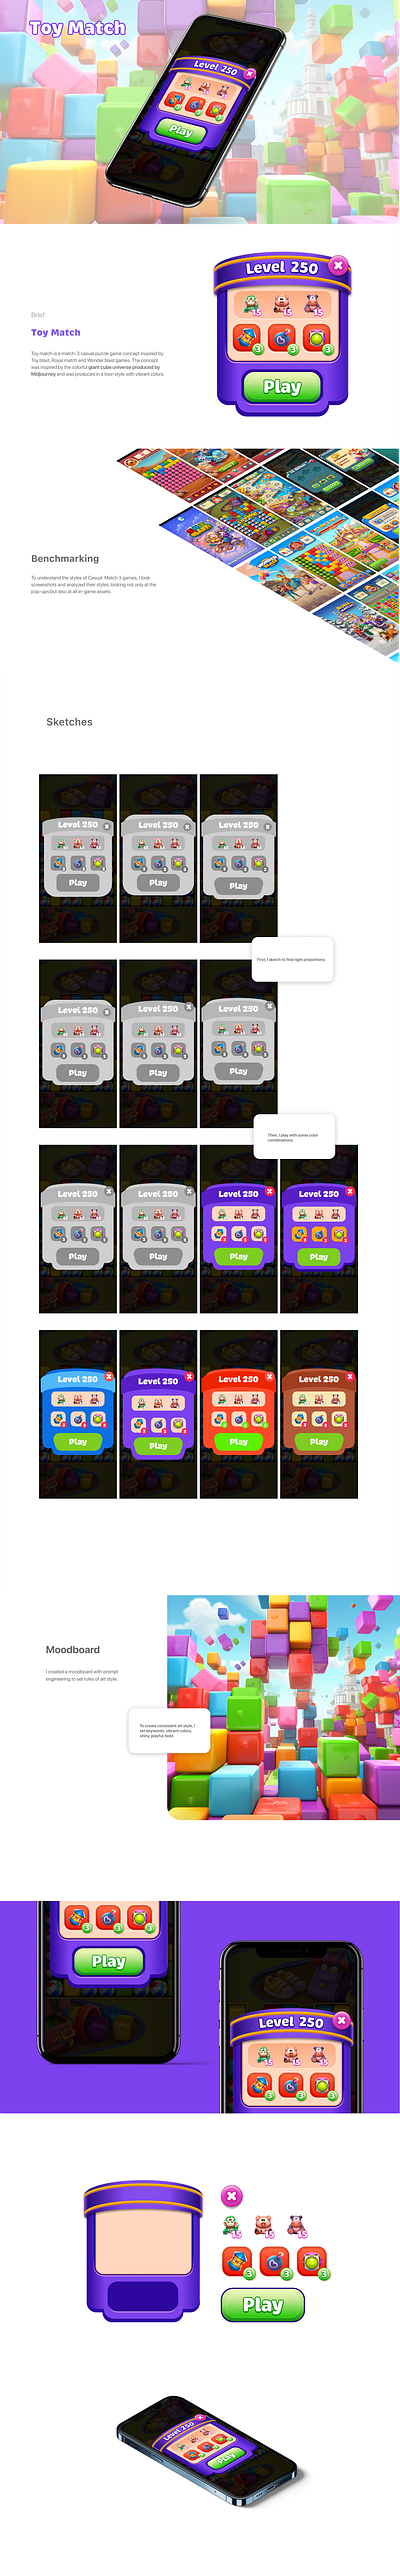 Toy Match- Match 3 Puzzle Game UI casual game game ui match3 ui ux